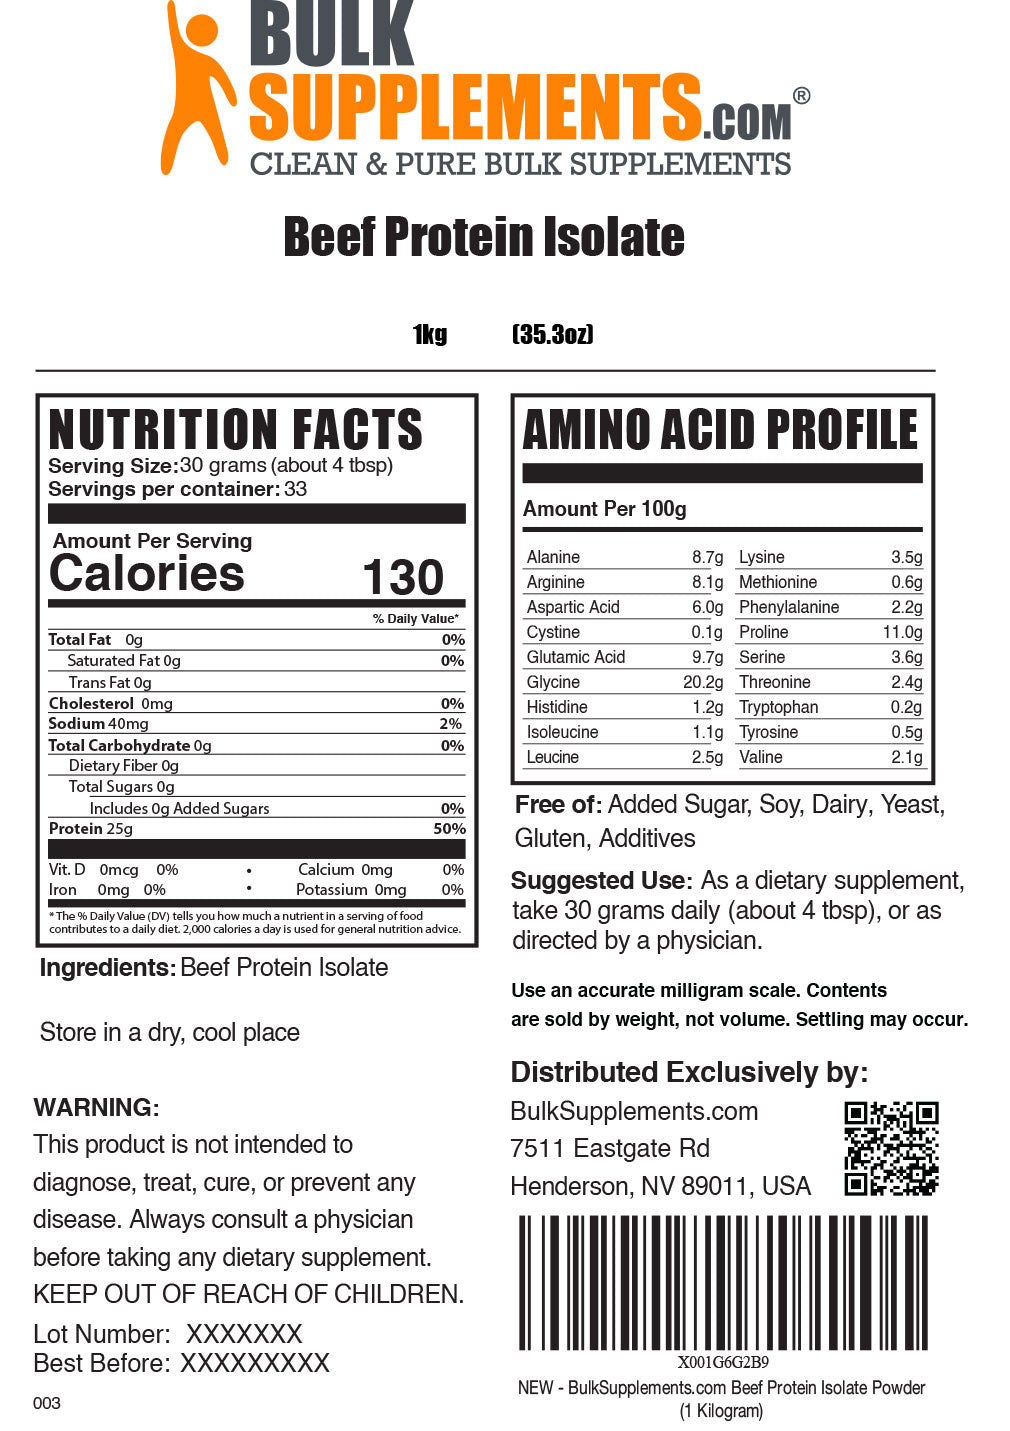 Beef Protein Isolate powder label 1kg